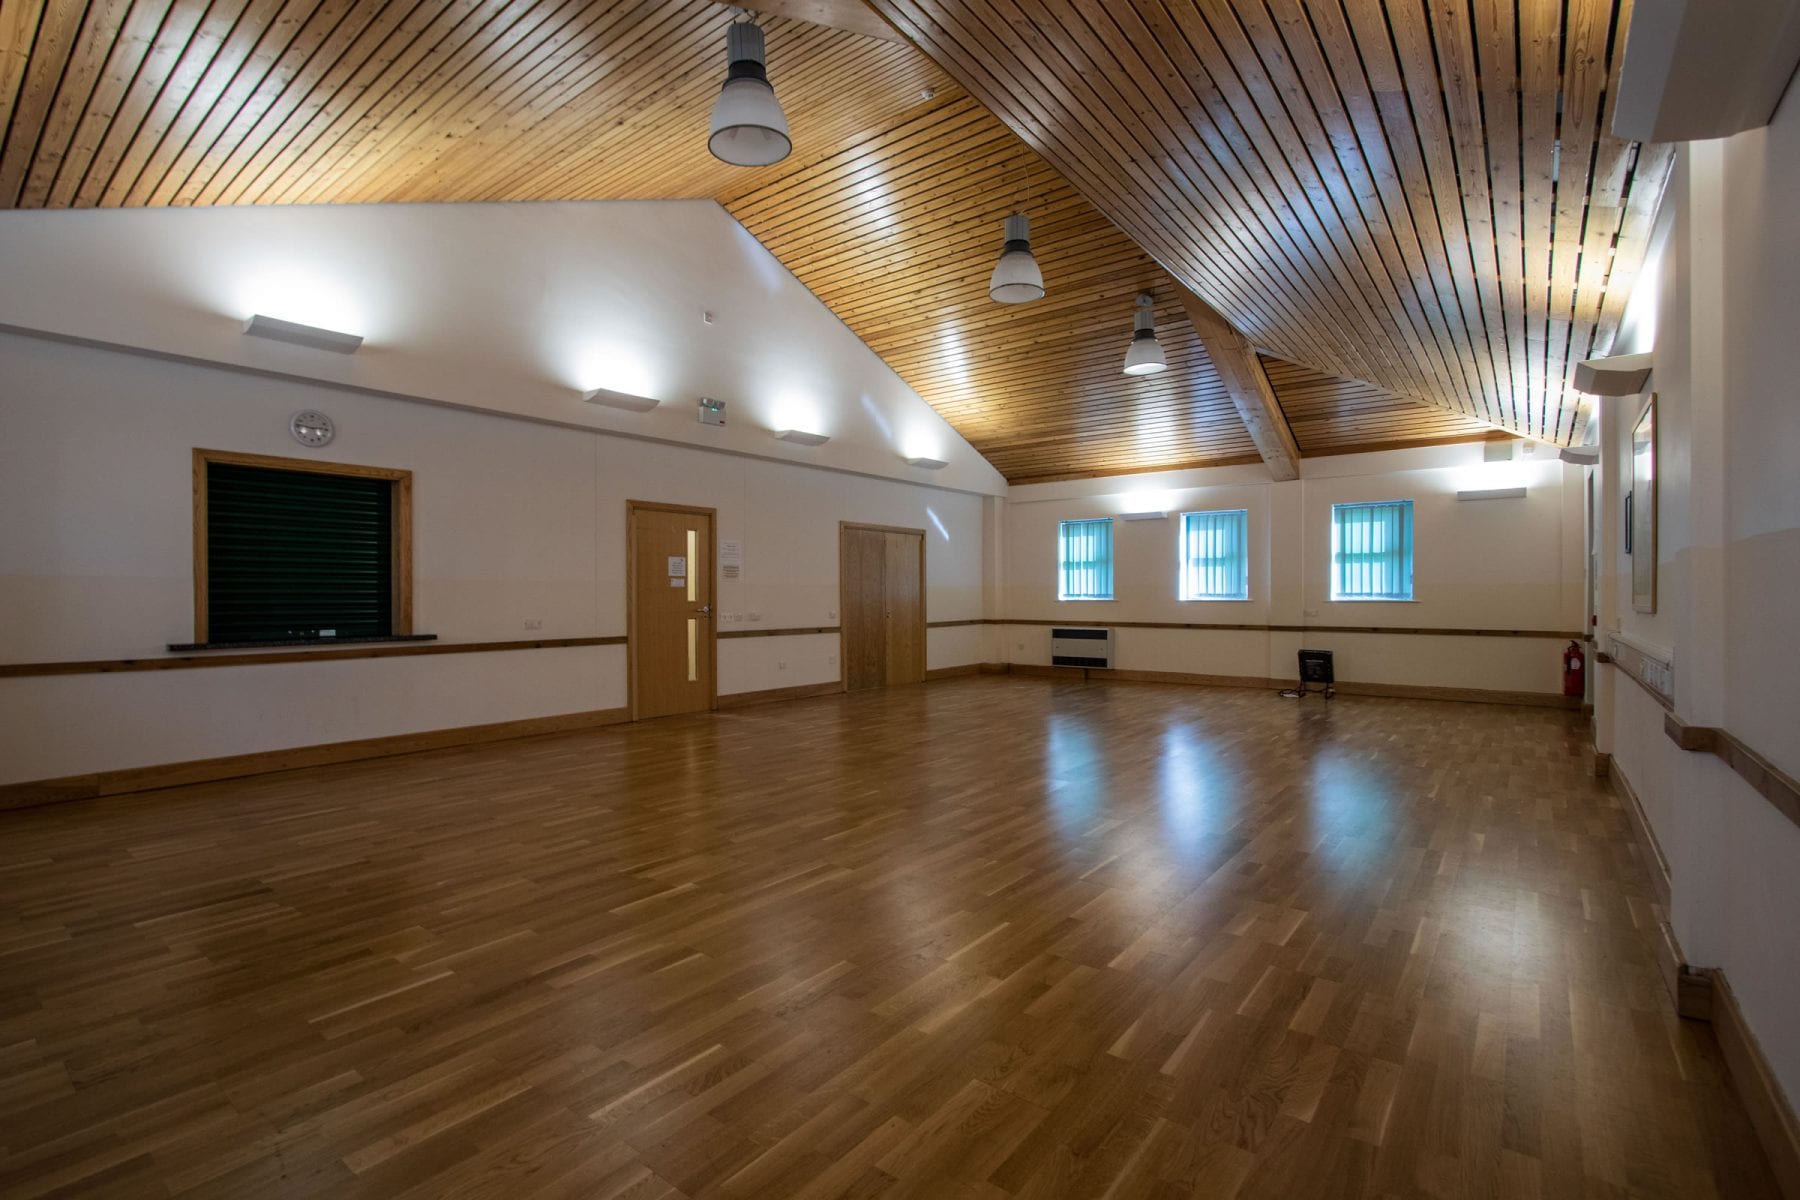 Petuaria Community Centre Large Hall for hire in Brough East Yorkshire